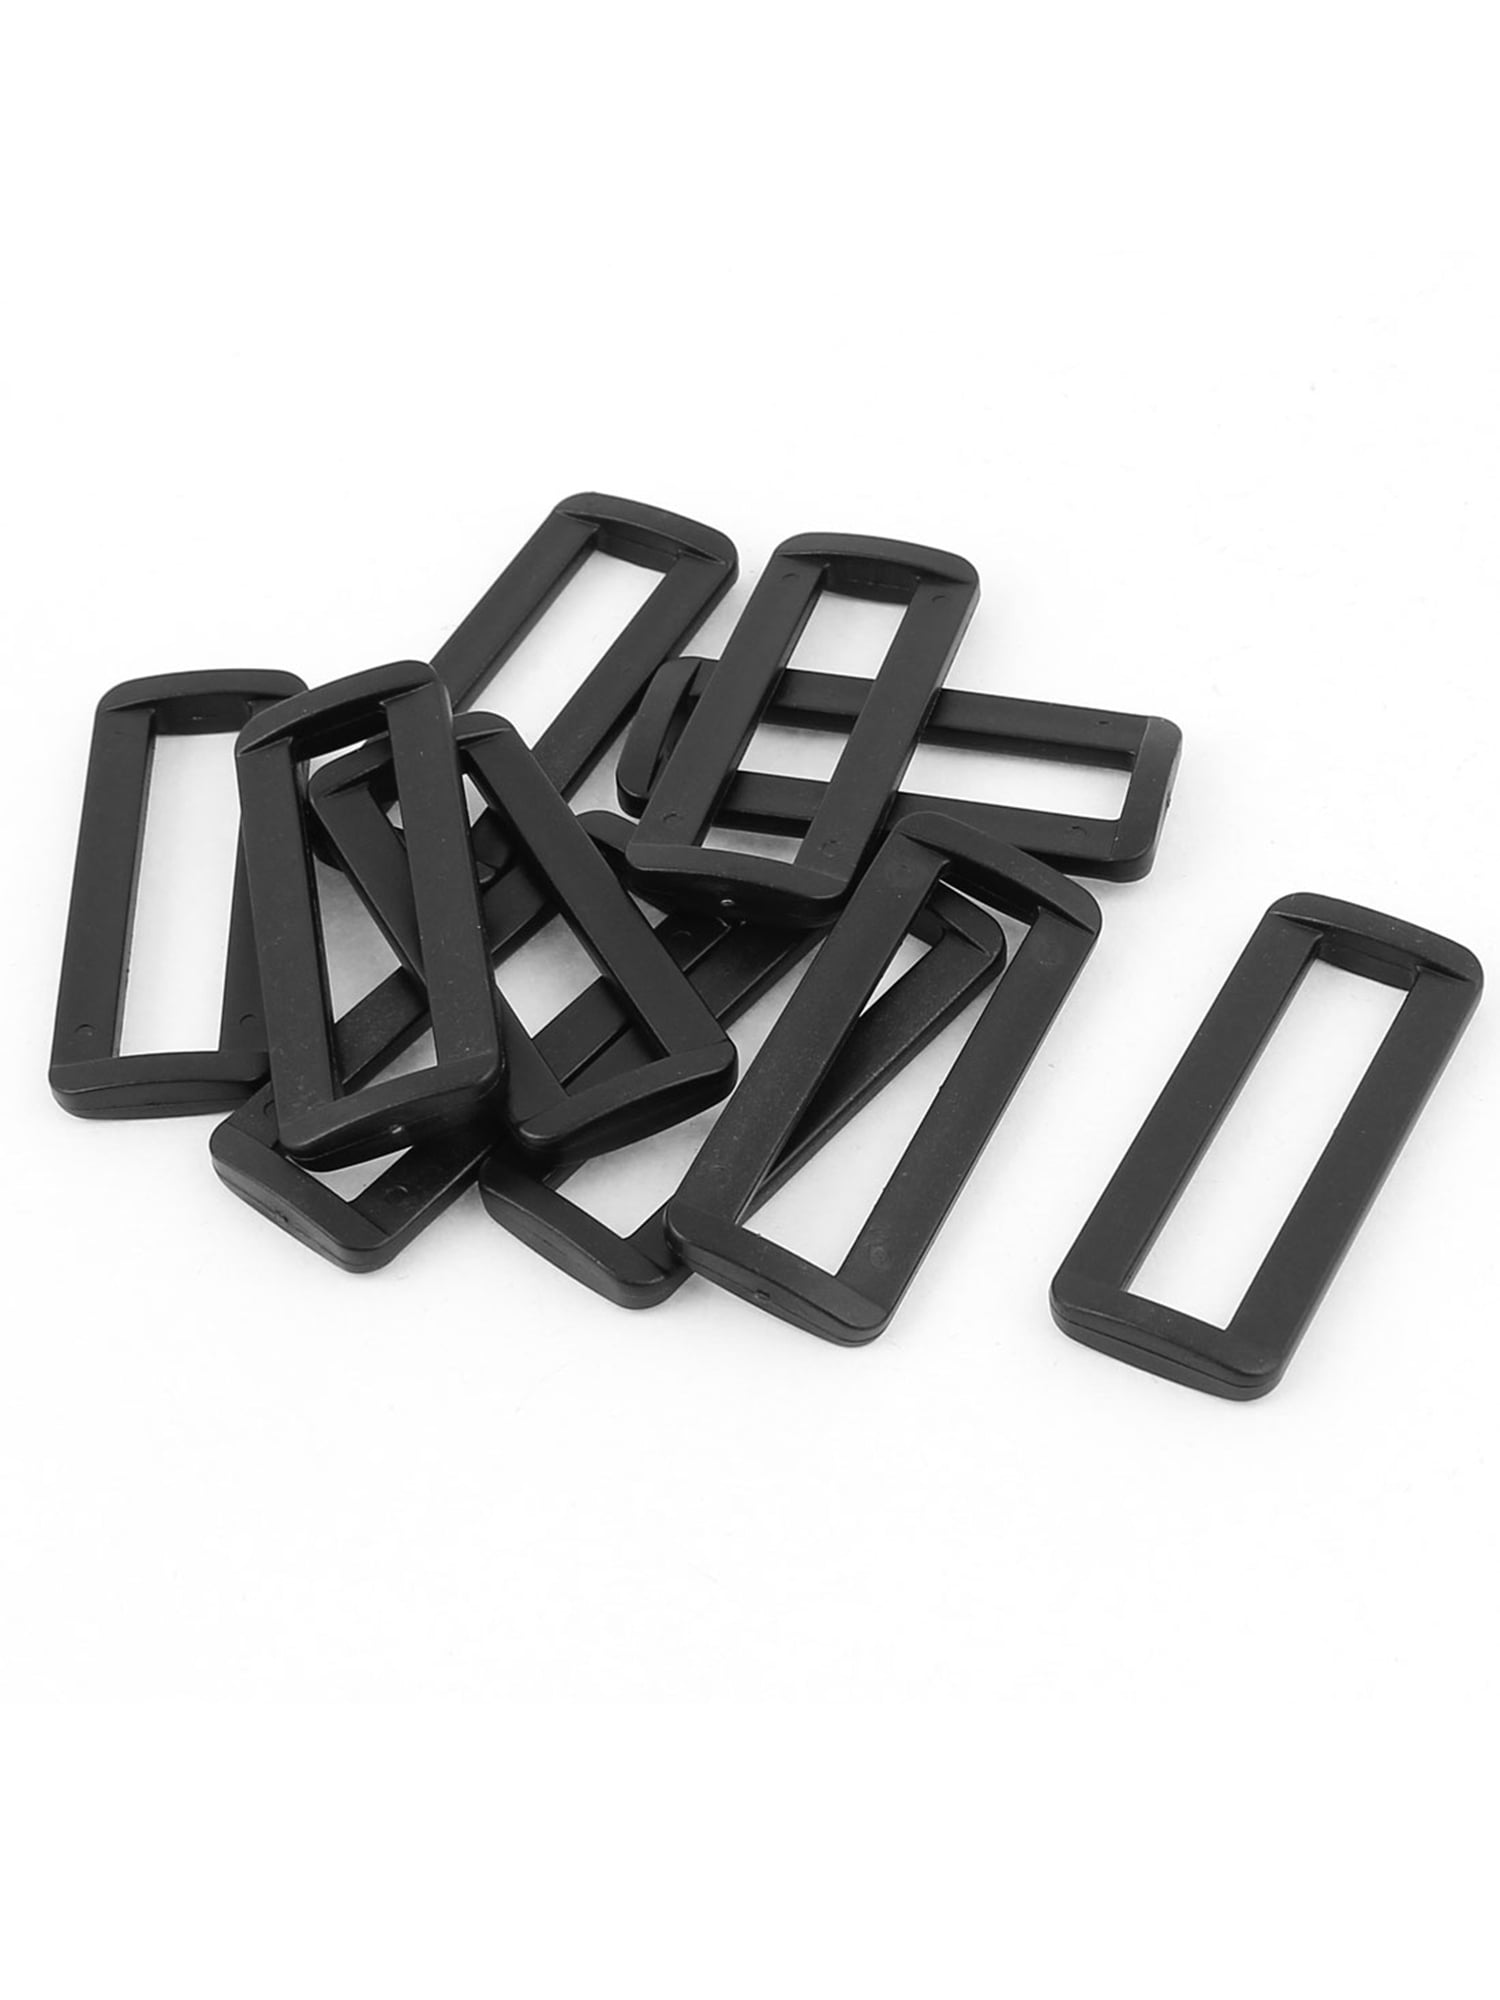 uxcellHard Plastic Strapping Rectangle Buckle Webbing Backpack 50pcs Black 